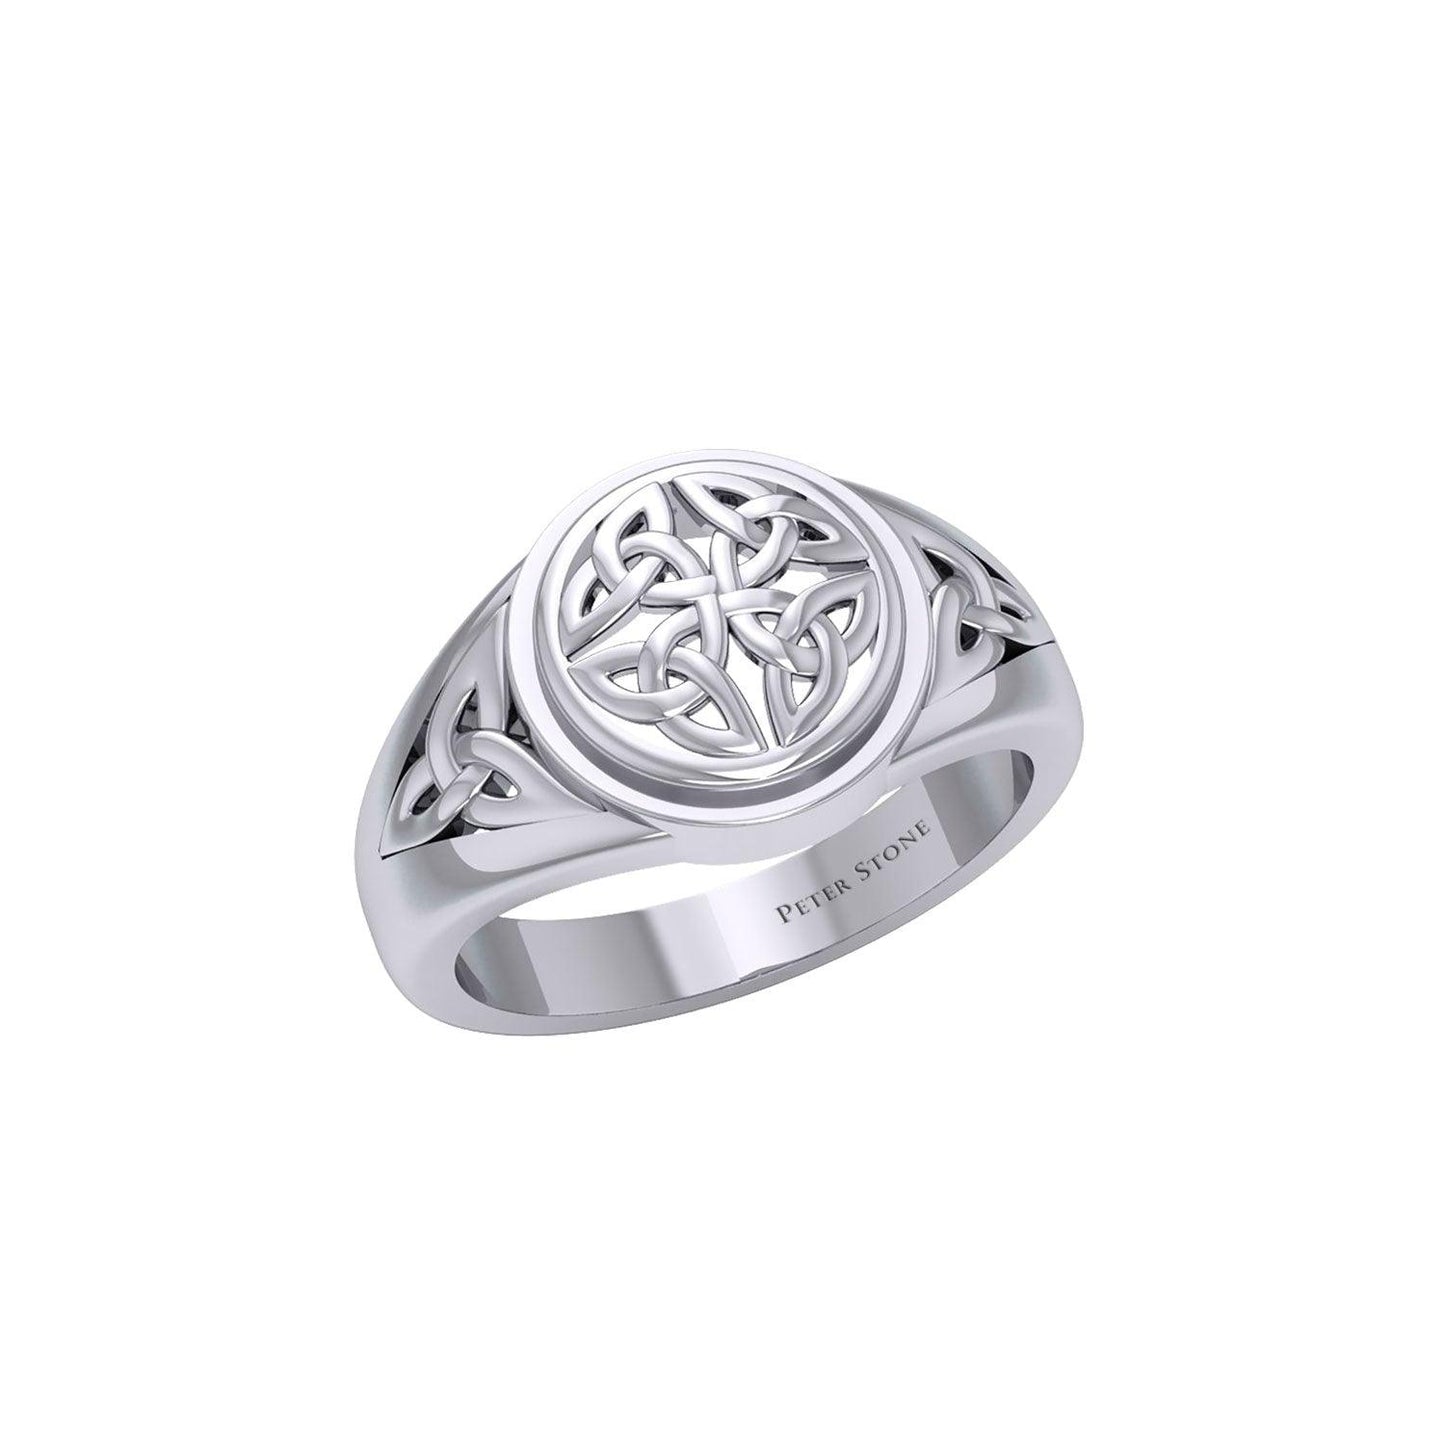 Celtic Quaternary Knot Silver Ring TRI1758 - peterstone.dropshipping